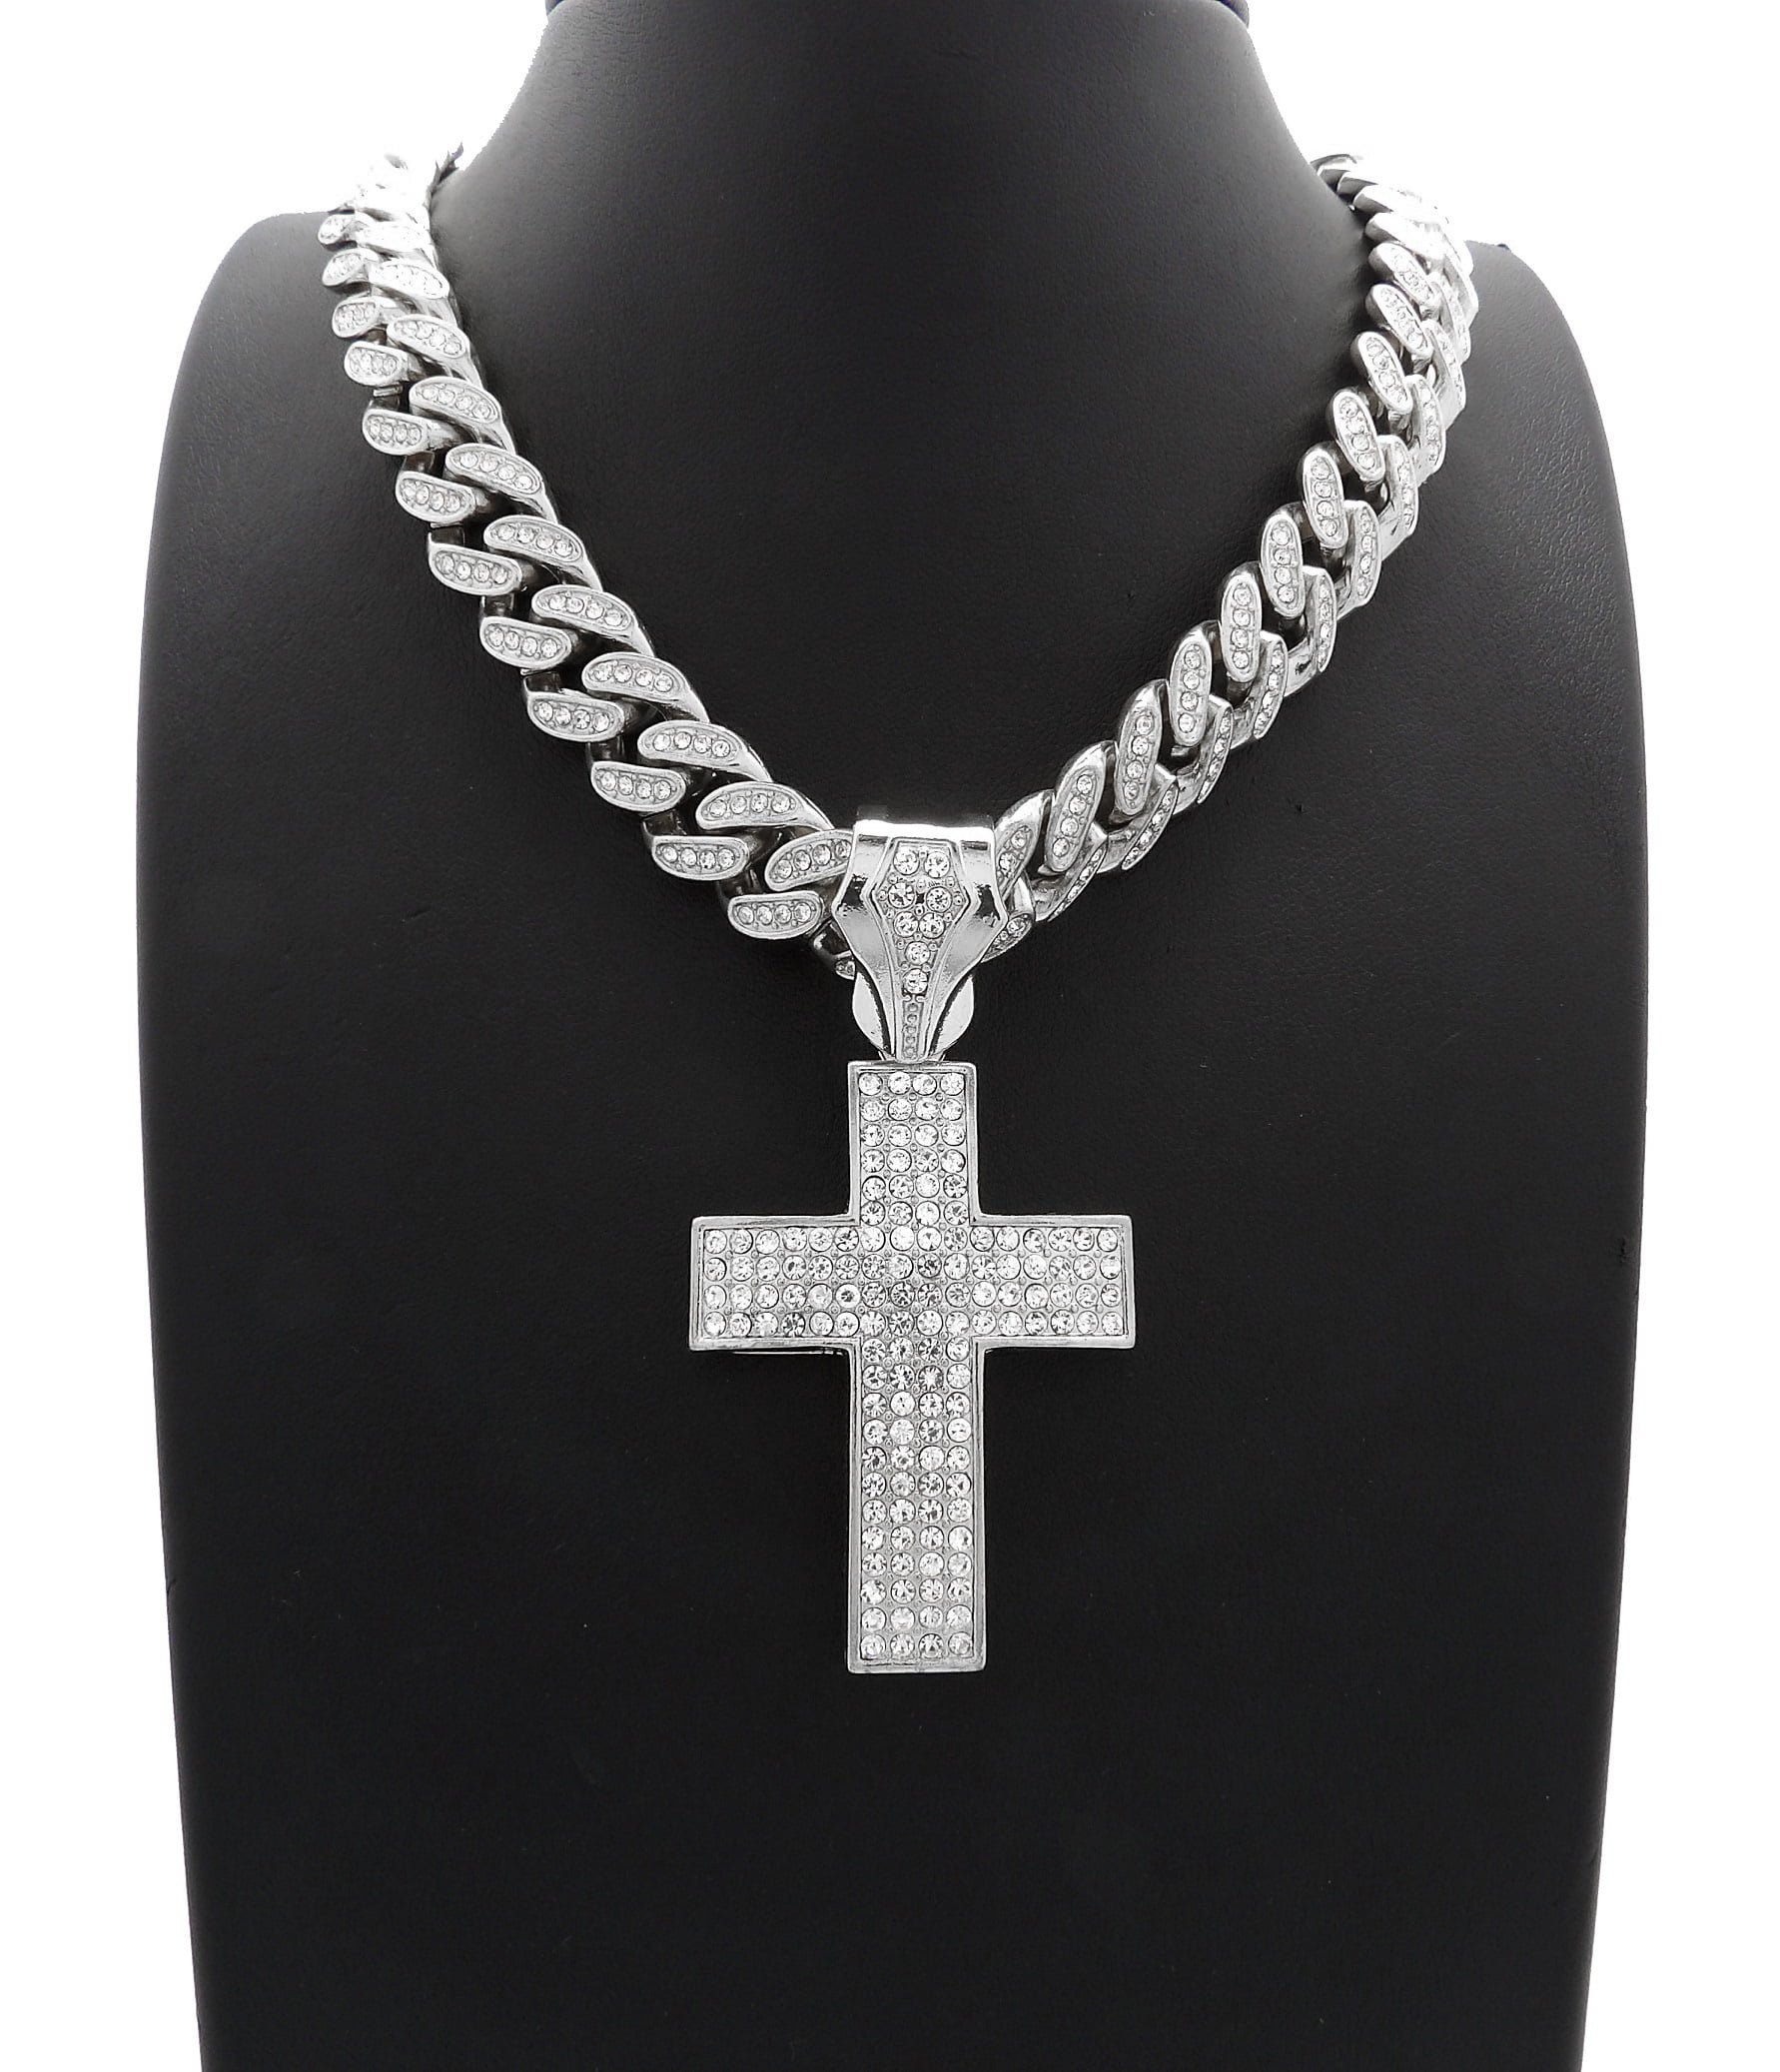 Gold Hip Hop Necklace Solid 925 Sterling Silver 1" Iced Diamond Cross Pendant 